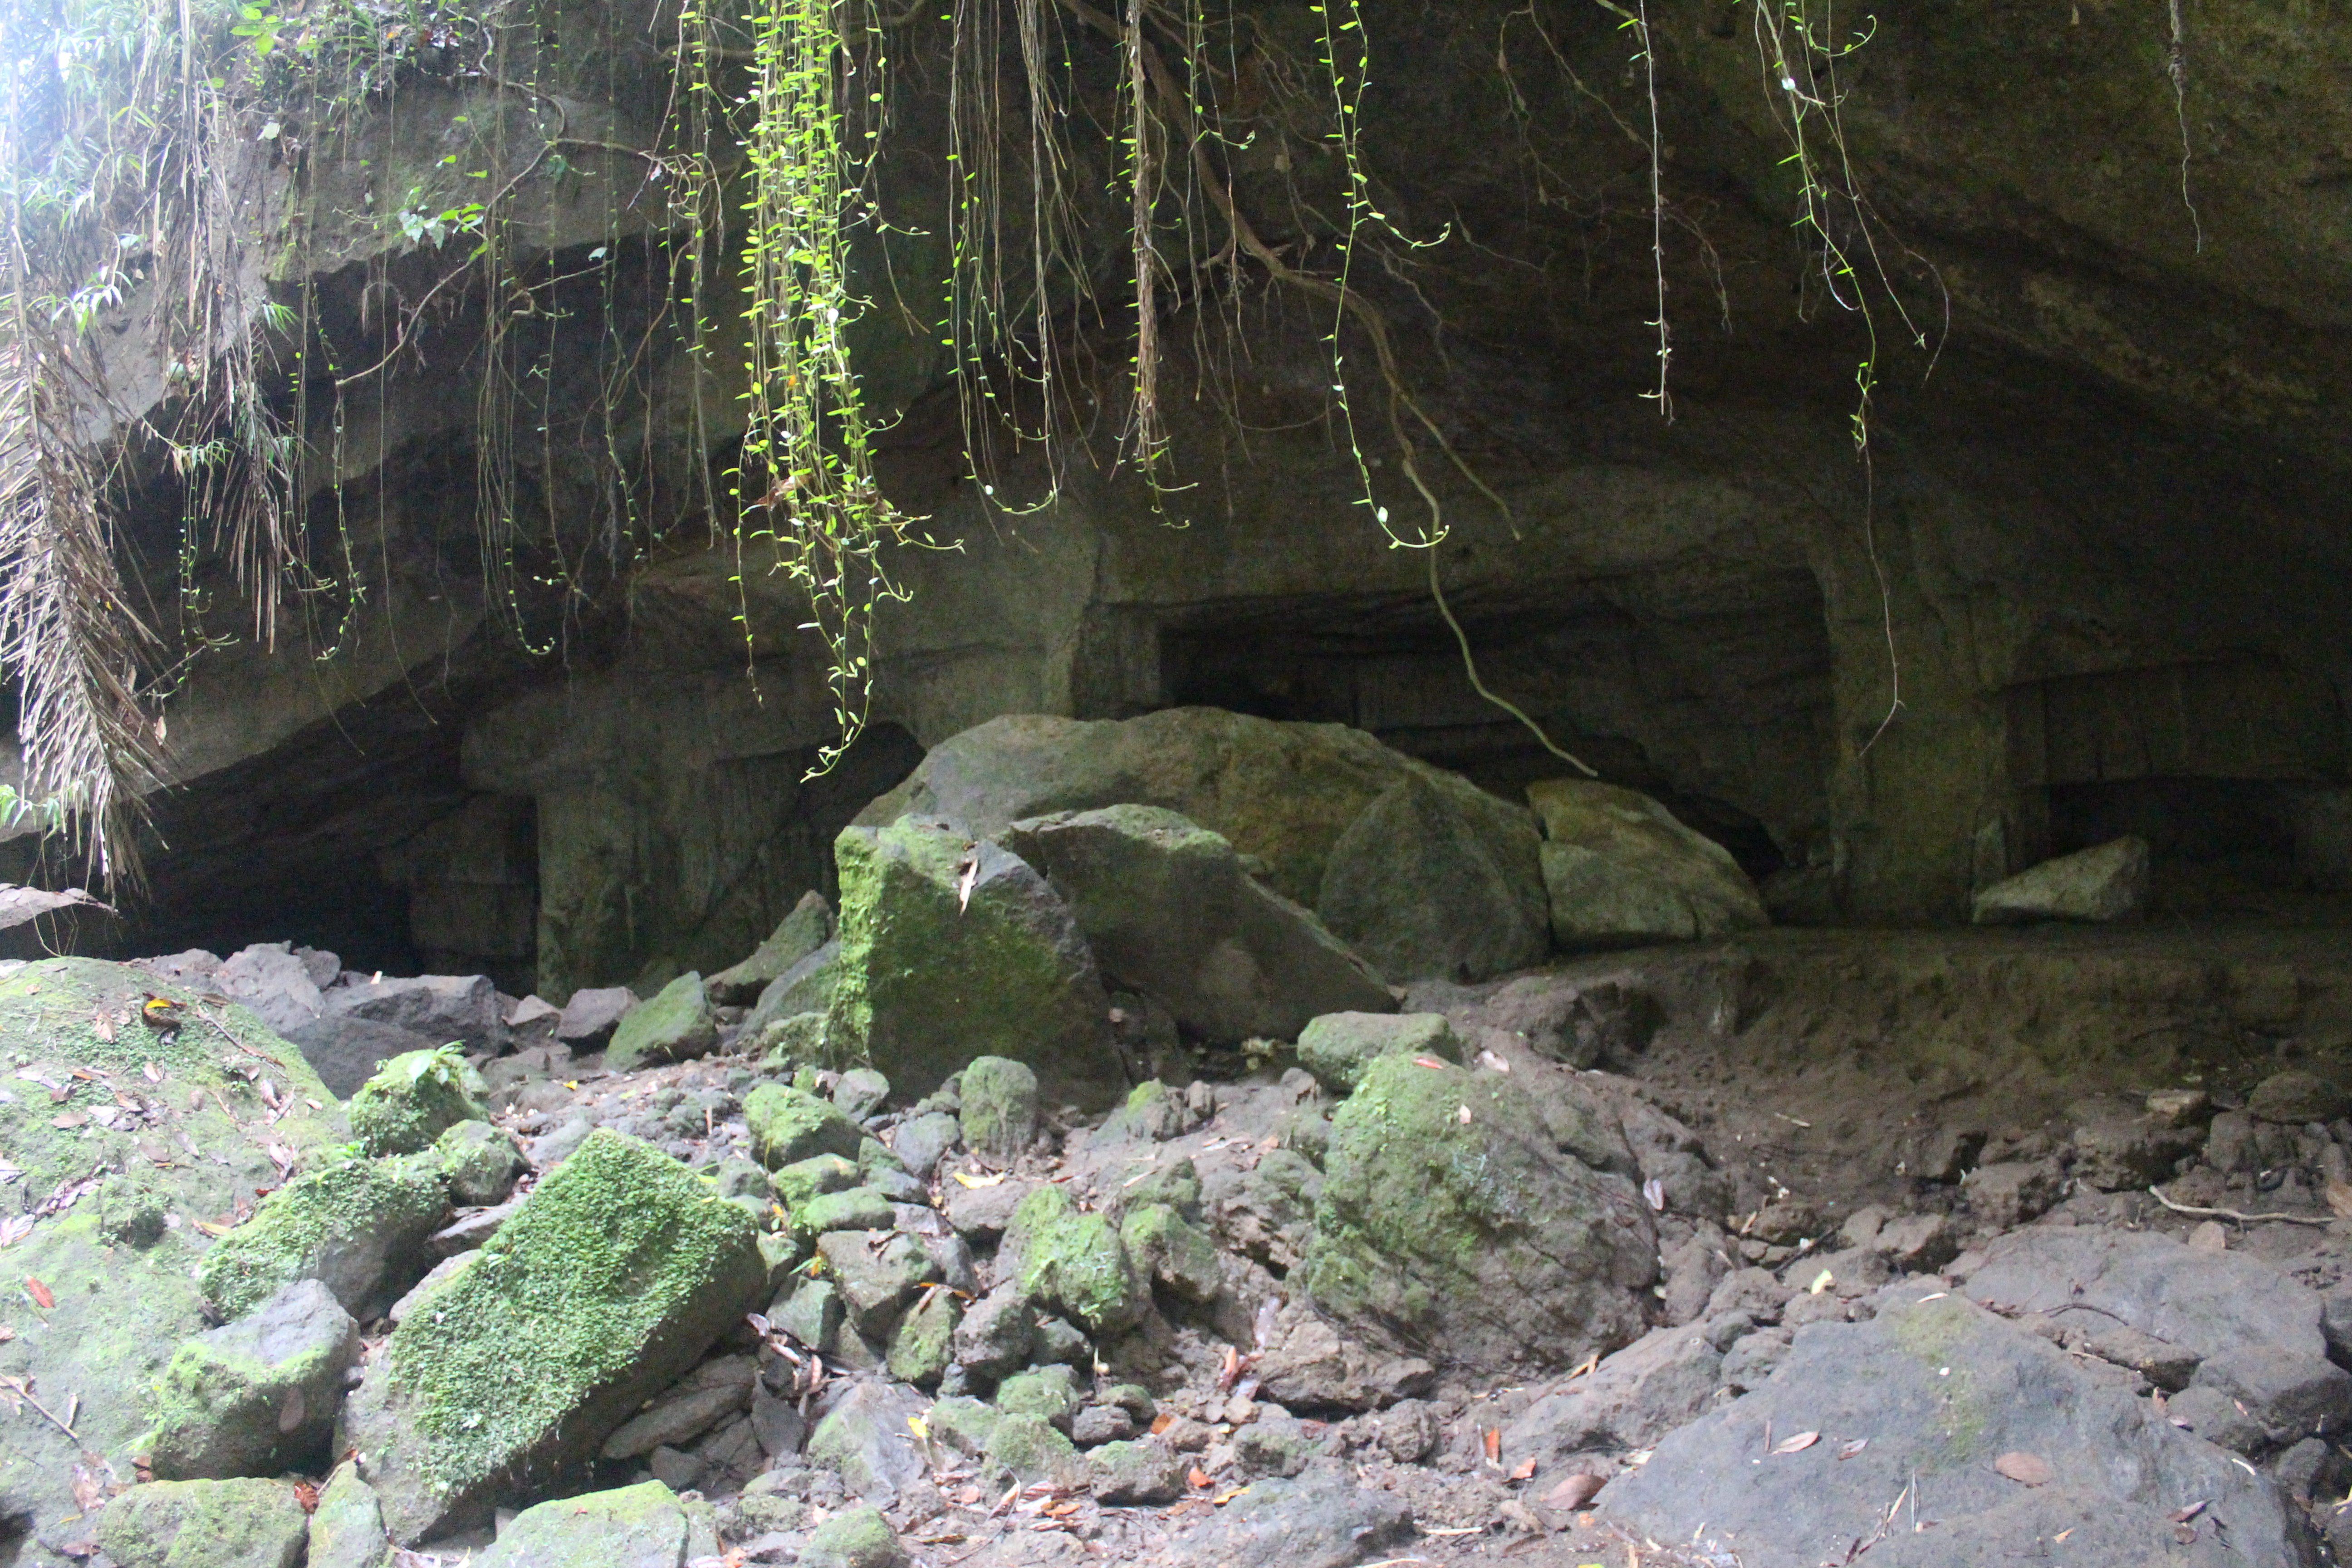 Caves beside a river ravine